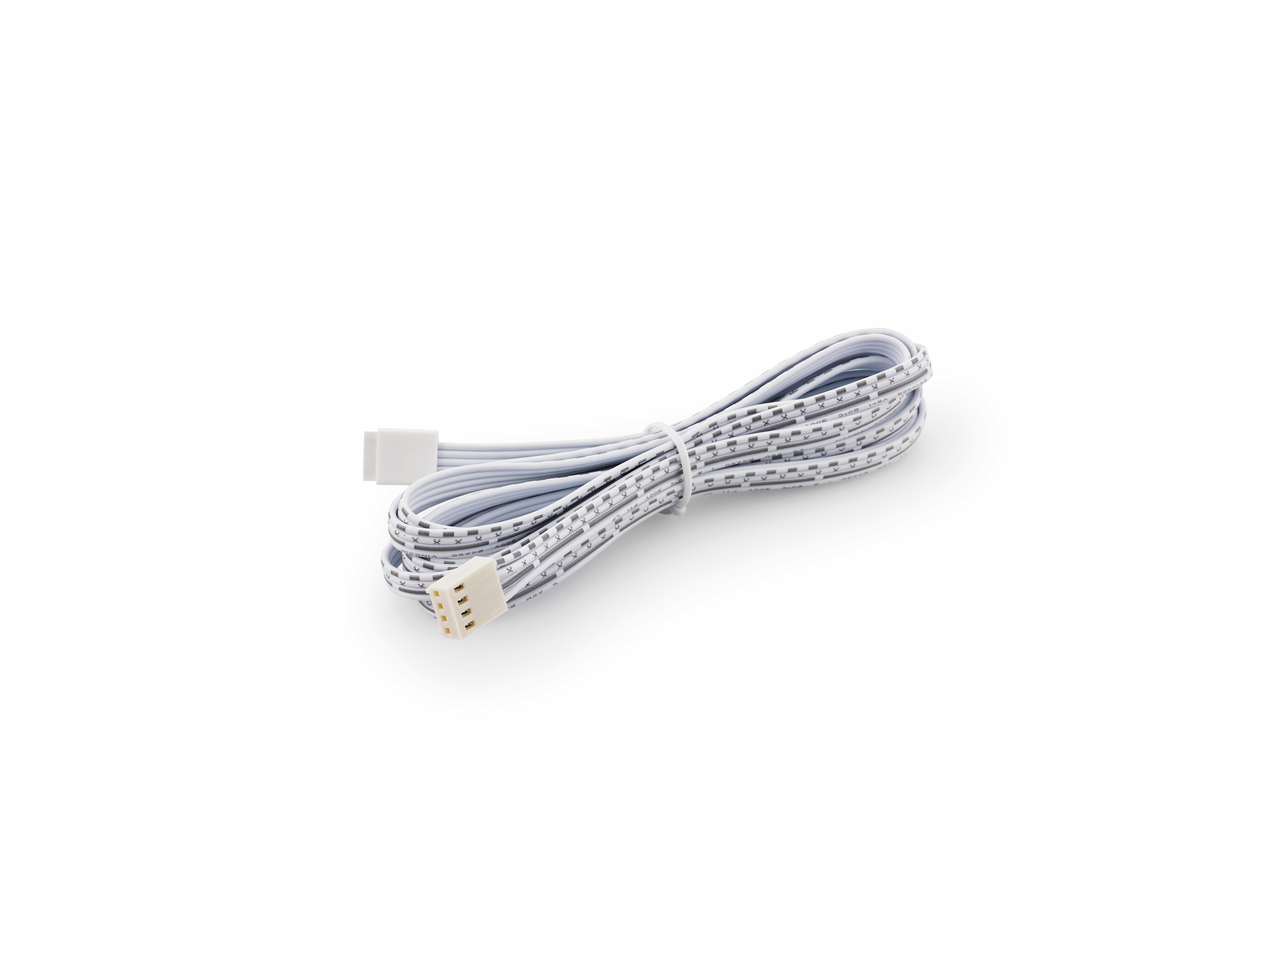  LED connecting cable RGB, white